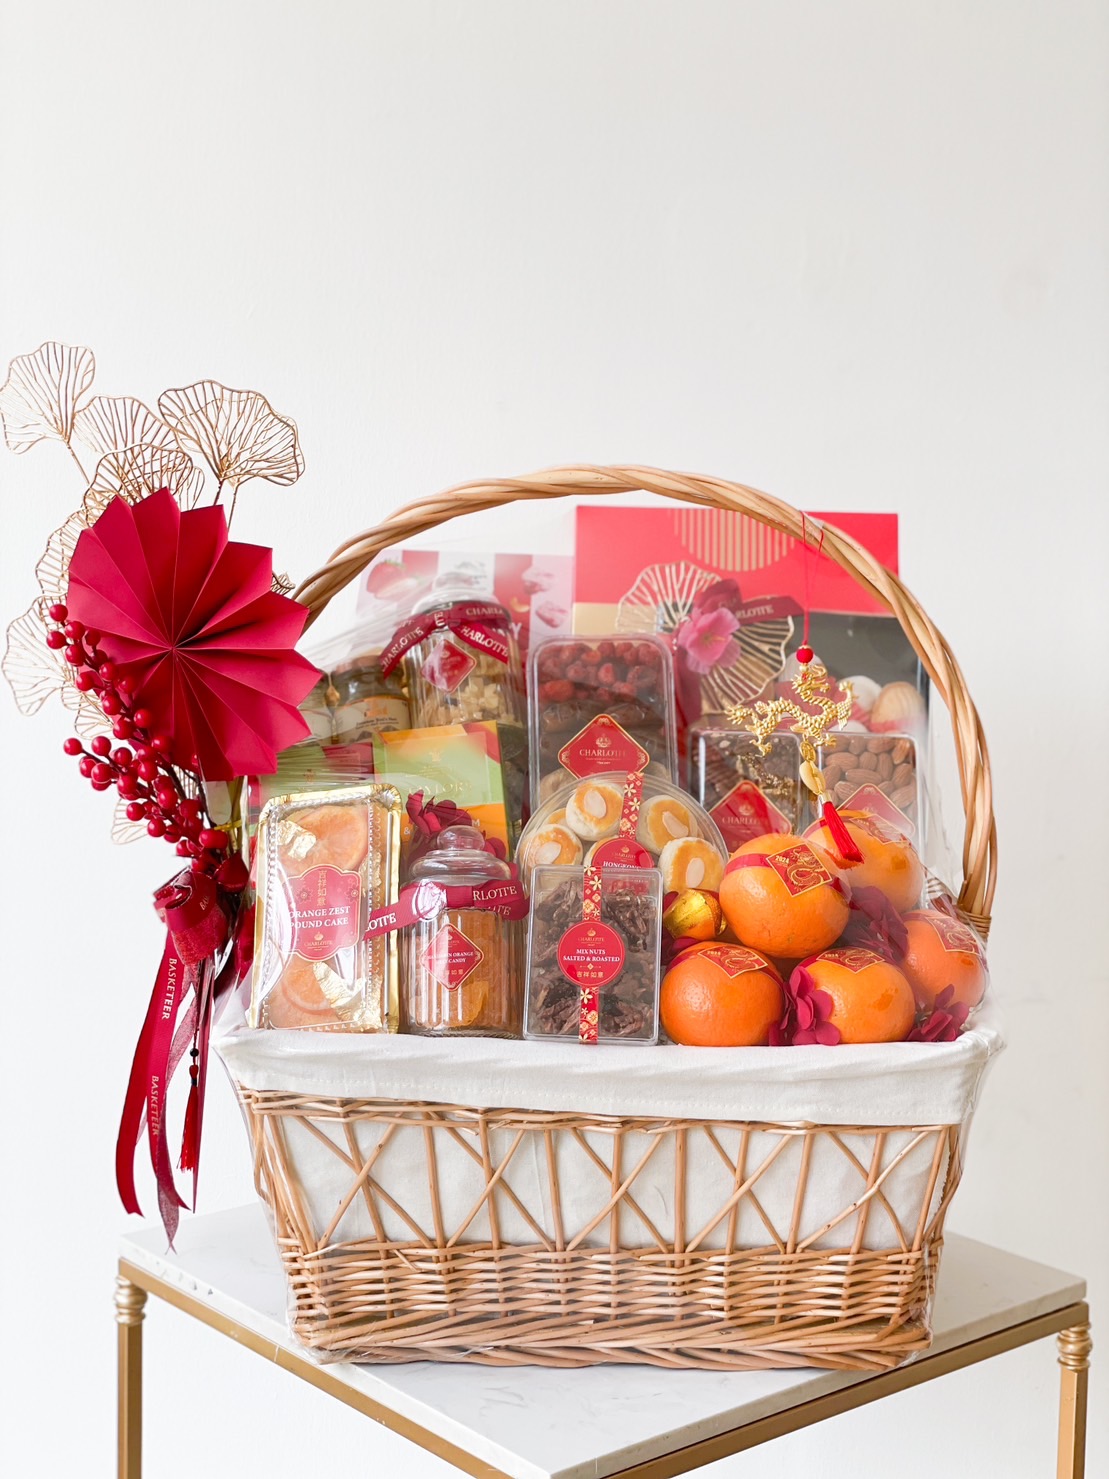 Chinese New Year Gift In Mandarin Orange, Cookies, Orange Zest Pound Cake, Bird's Nest and many In The Basket With Decoration.